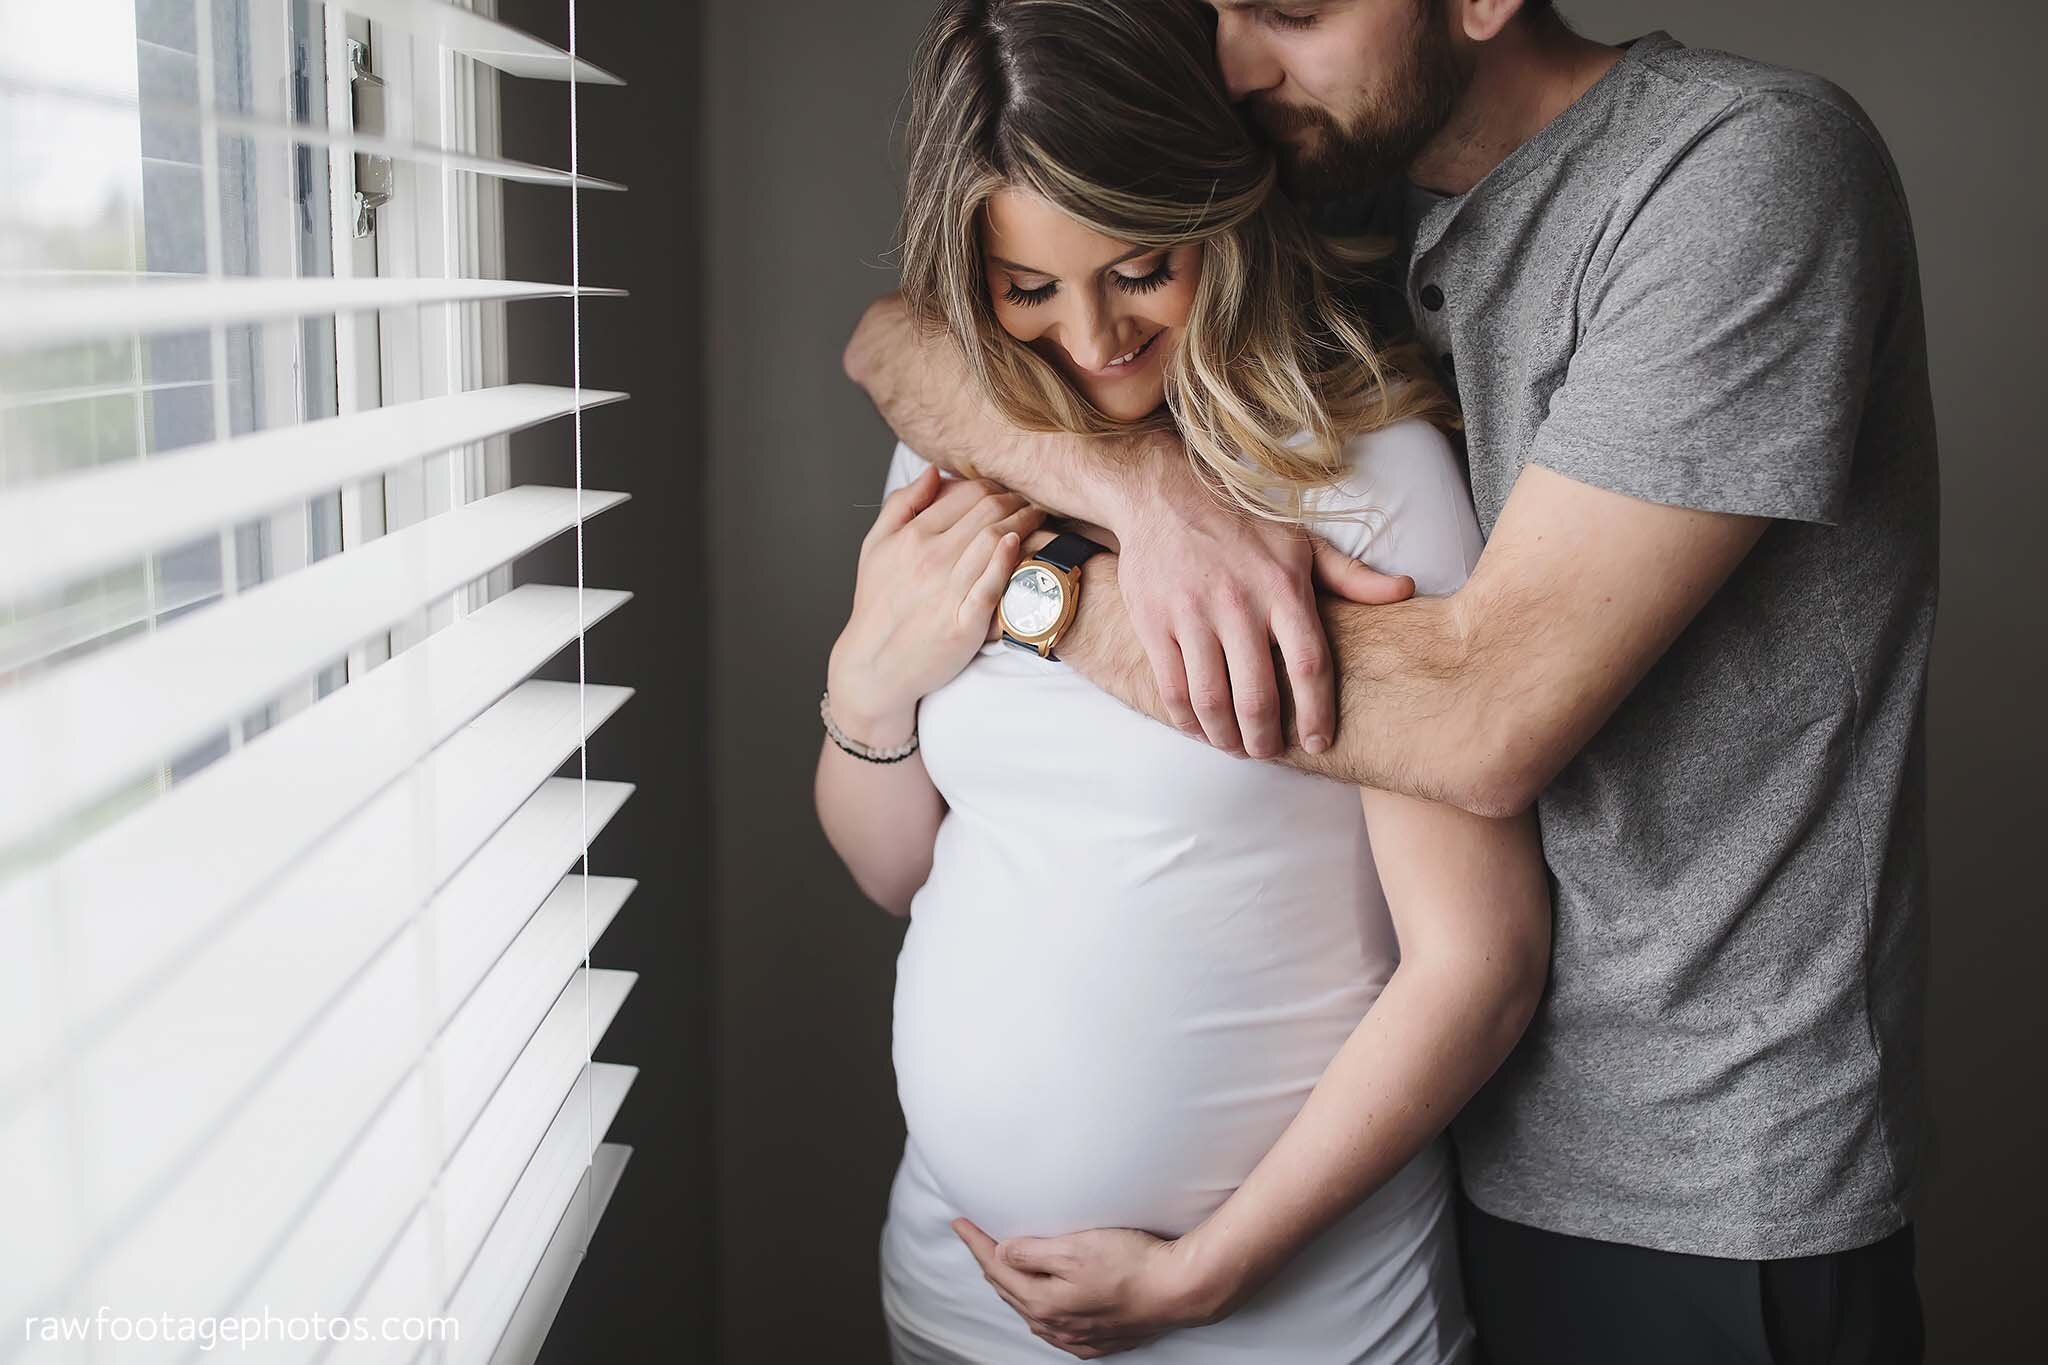 london_ontario_maternity_photographer-raw_footage_photography-in_home_lifestyle_maternity-forest_maternity_session-yellow_maternity_dress_004.jpg